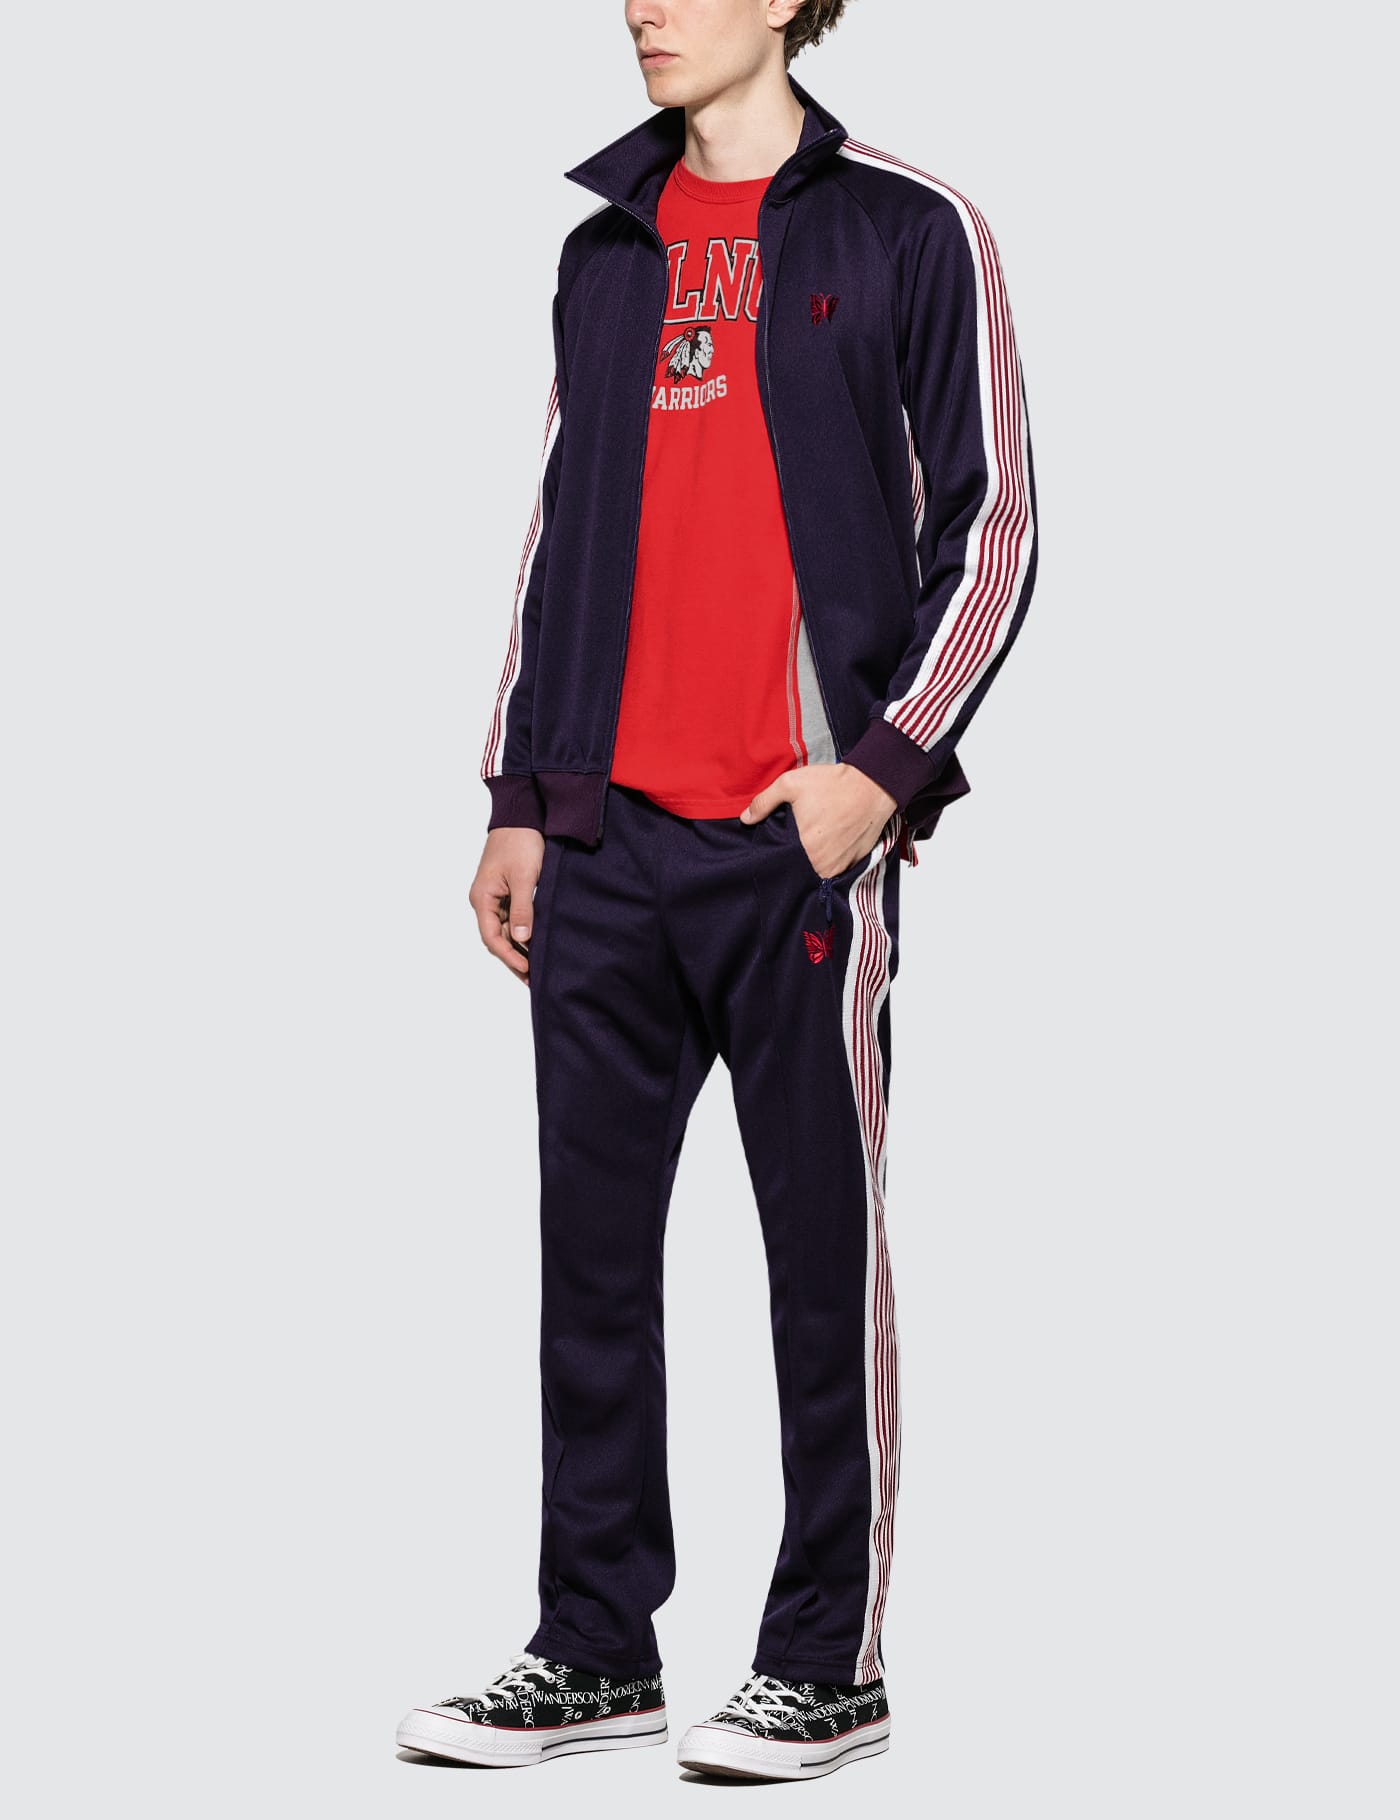 Needles - Narrow Track Pants | HBX - Globally Curated Fashion and 